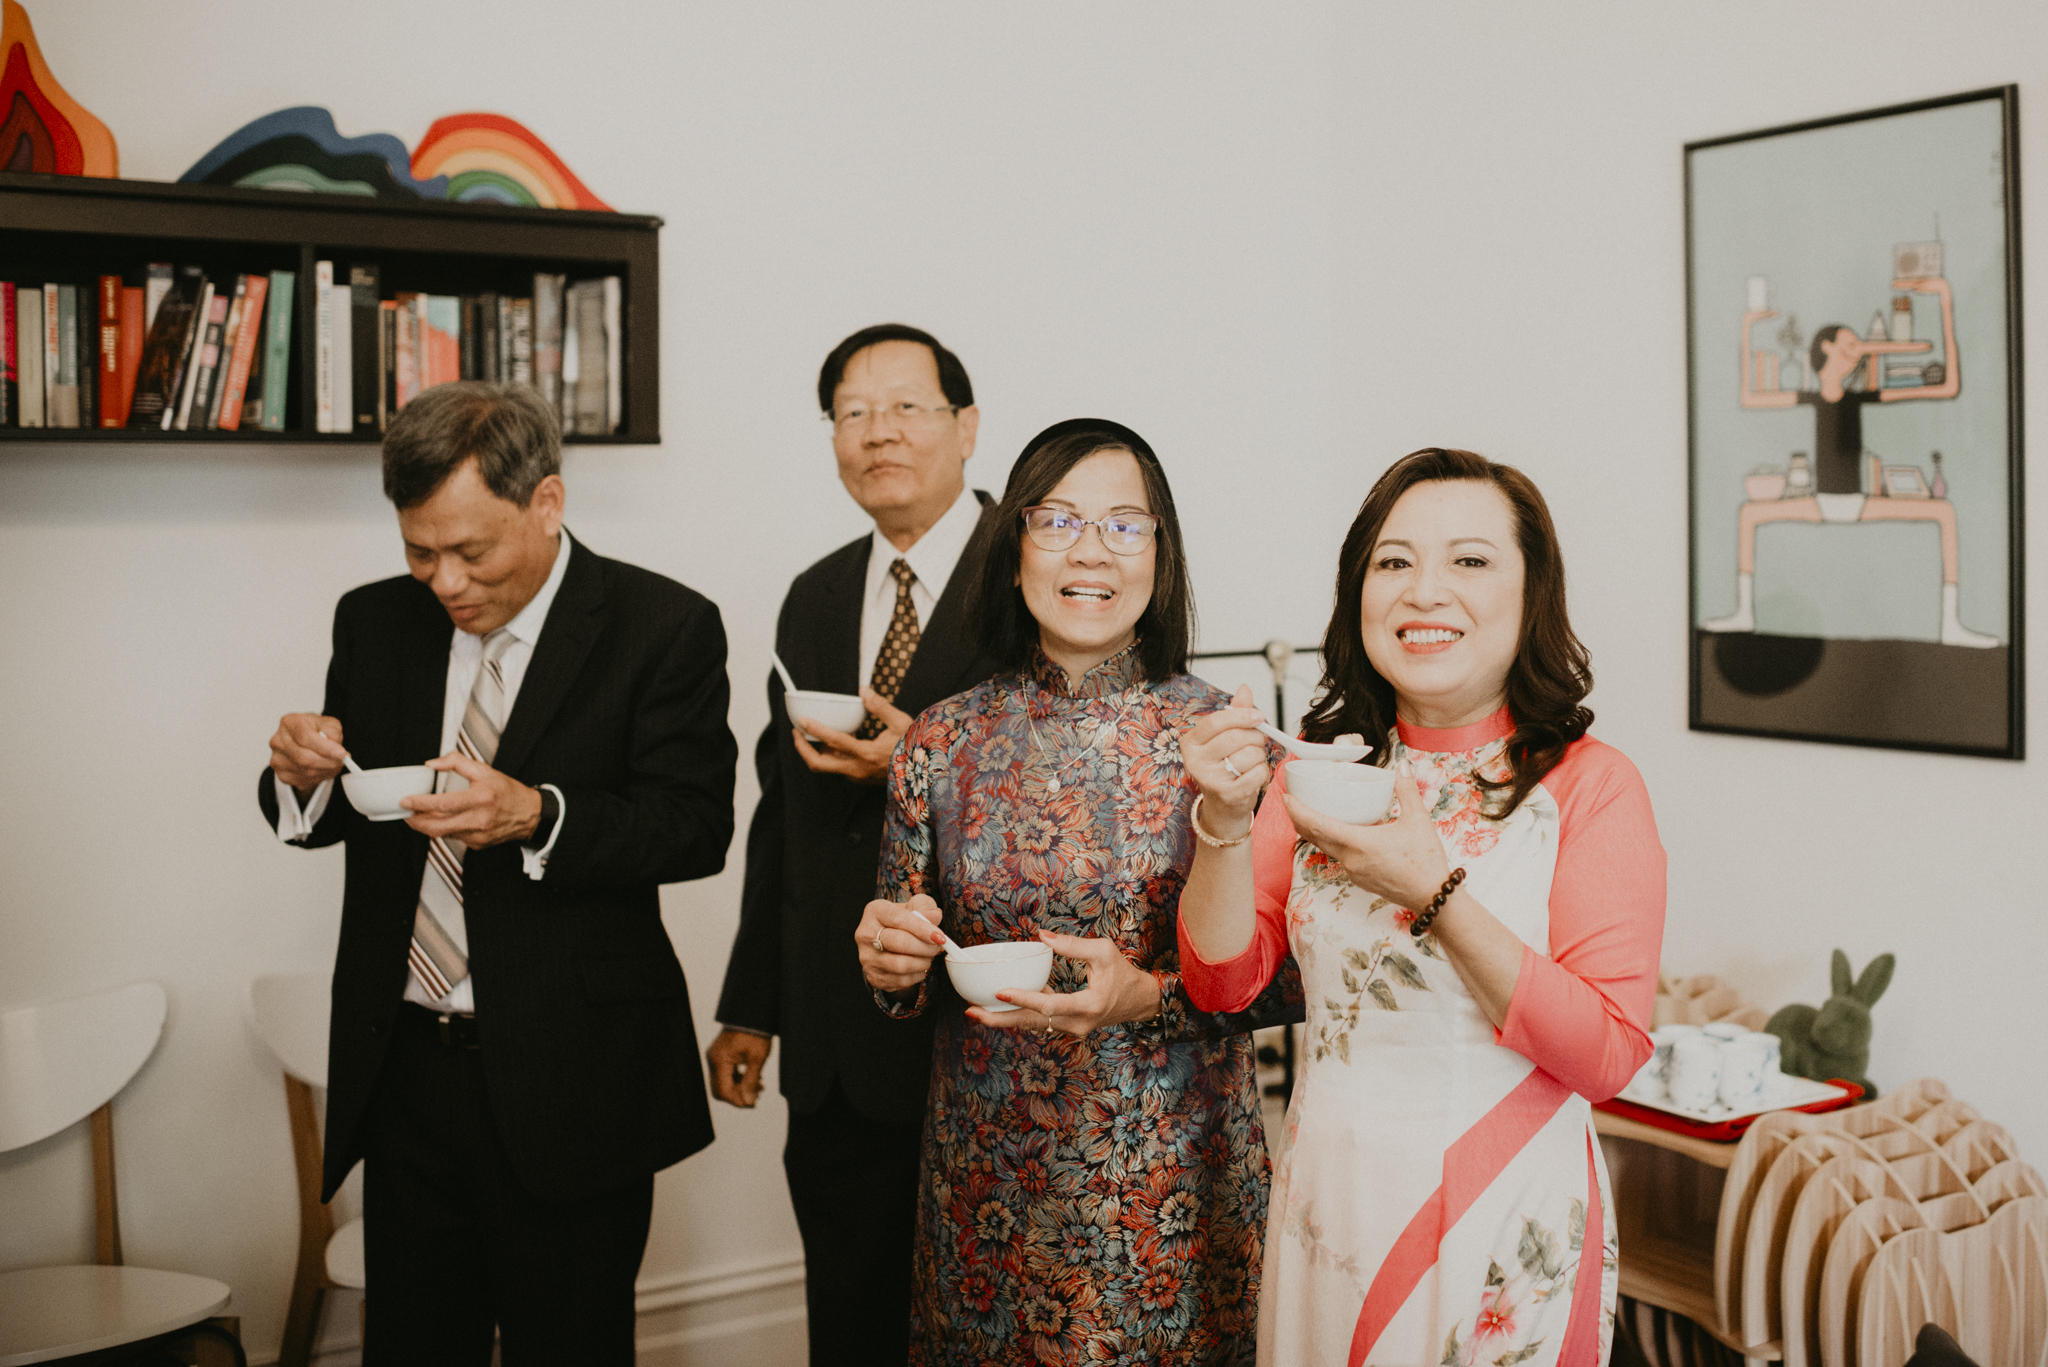 agnes-duy-15th-december-2018-chinese-vietnamese-wedding-tea-ceremony-yarraville-home-house-documentary-candid-photographer-sarah-matler-photography-40